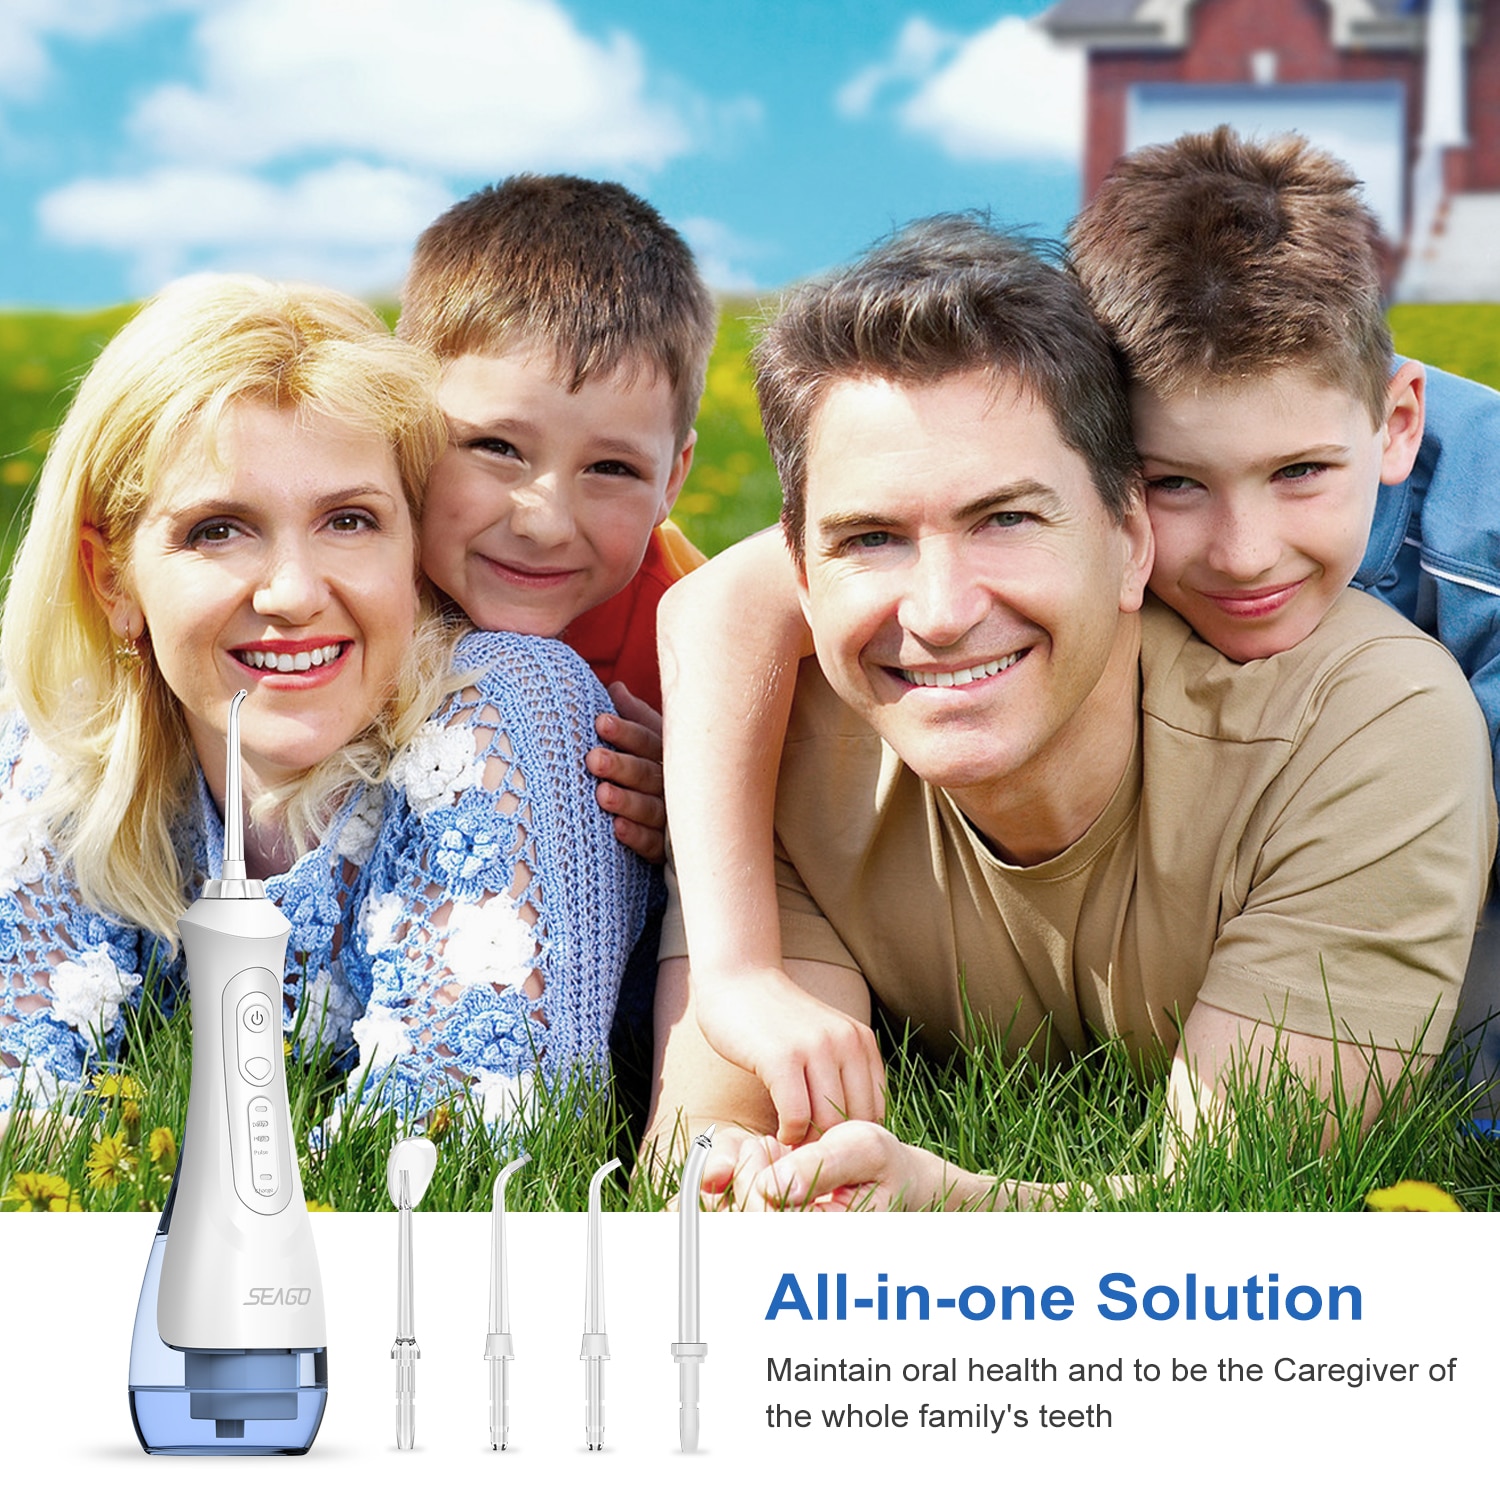 USB Rechargeable Water Flosser Oral Irrigator Dental Portable 3 Modes 200ML Tank Water Jet Waterproof IPX7 Home